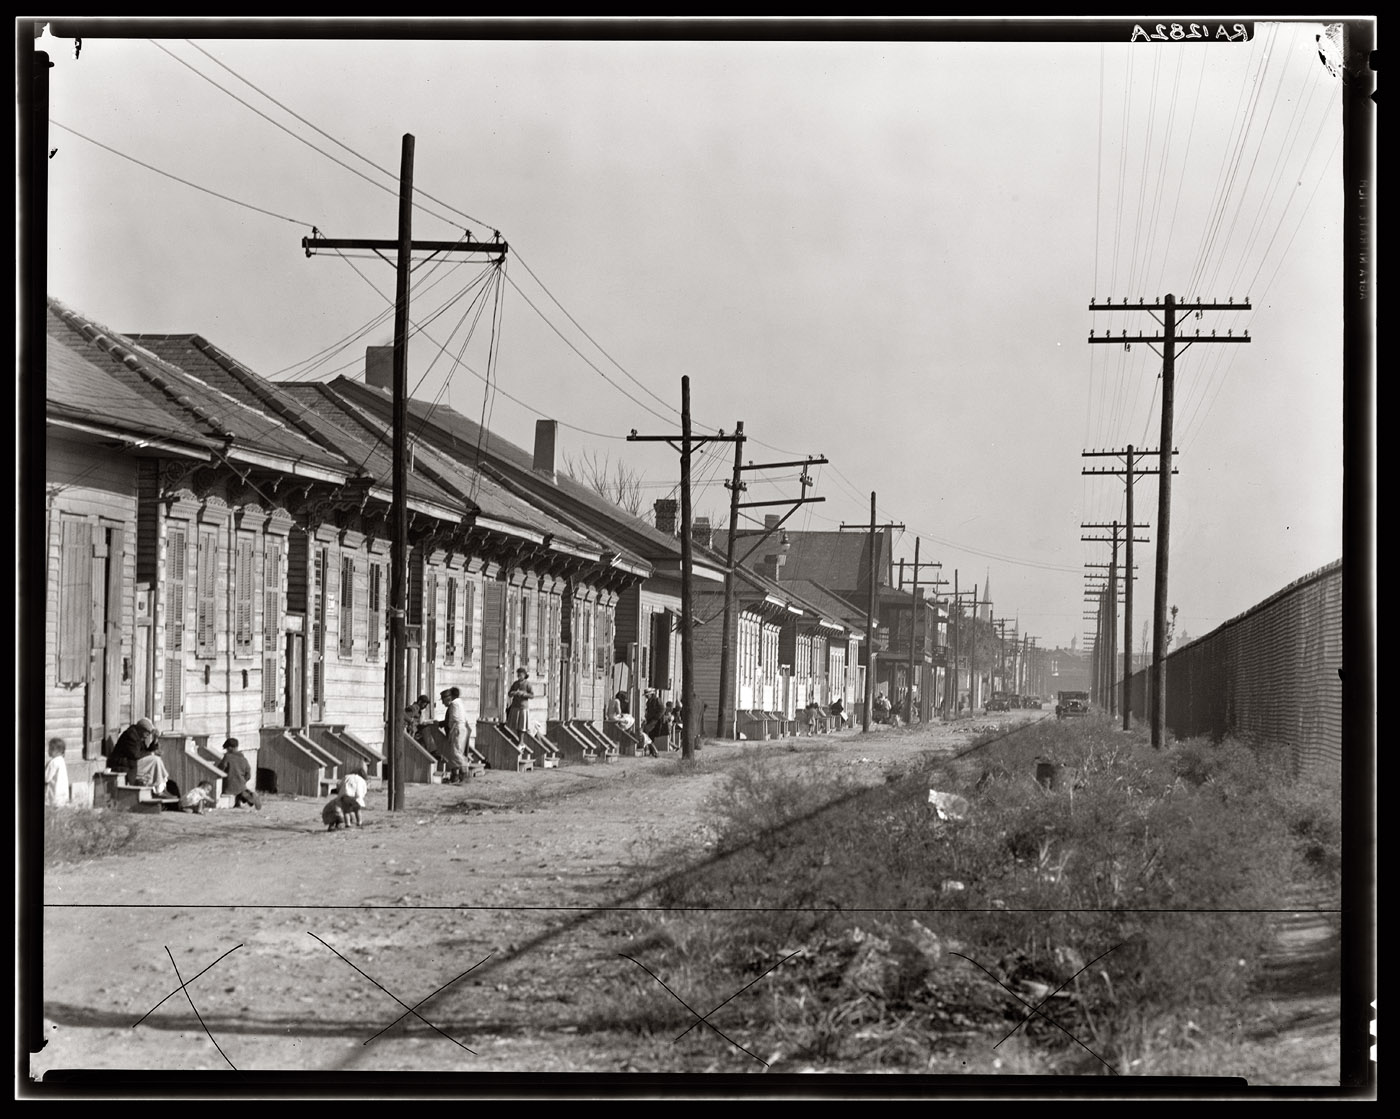 "New Orleans Negro street," December 1935. View full size. Photograph by Walker Evans. X's at bottom are crop marks.